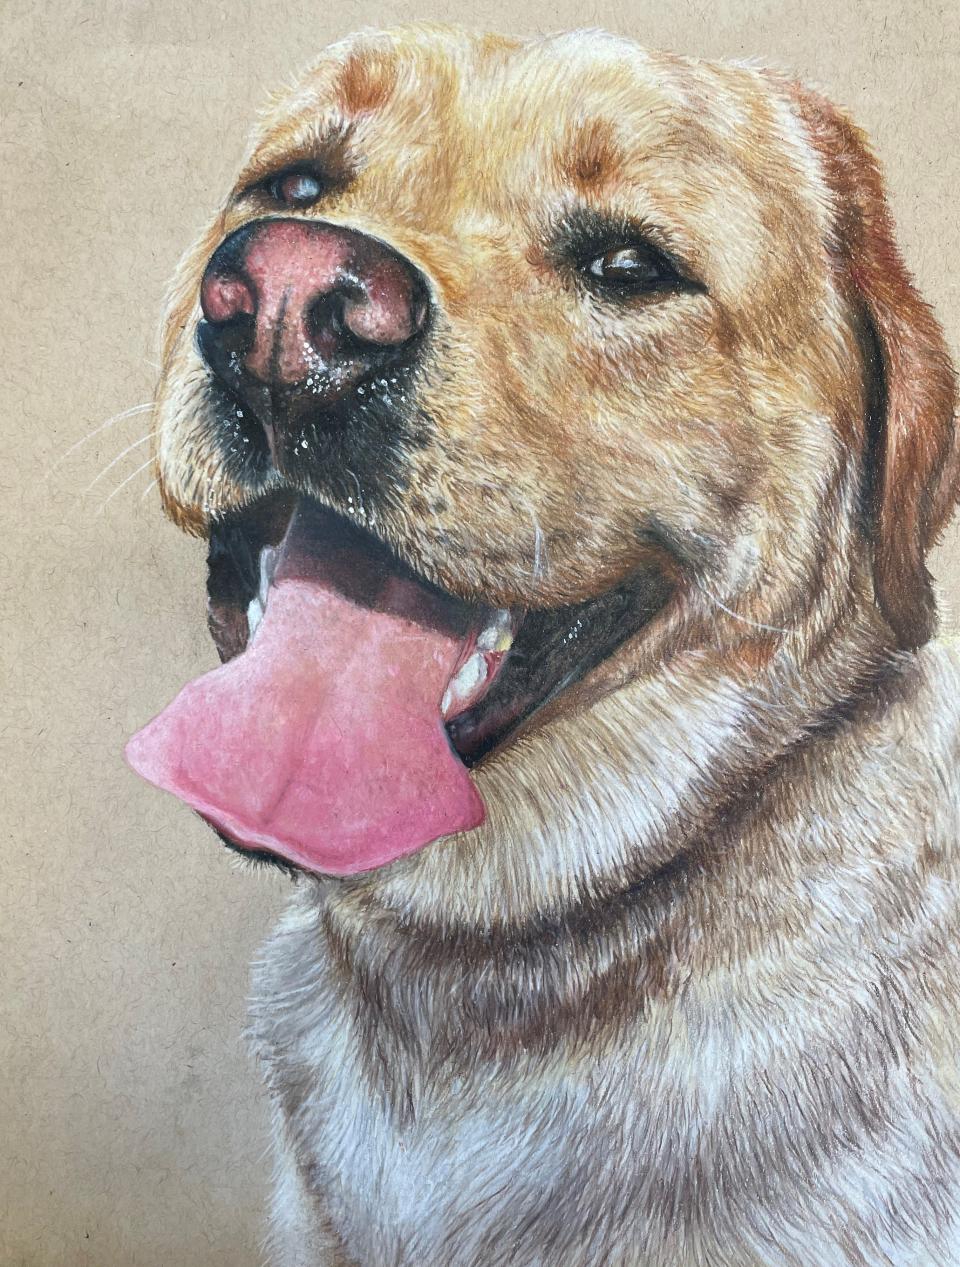 See Sophia Cosentino’s colored pencil dog portrait and more student artwork at the 2023 Geneva City School District Student Art Show. The exhibit is hosted by the Dove Block Project and runs through Saturday, May 27.